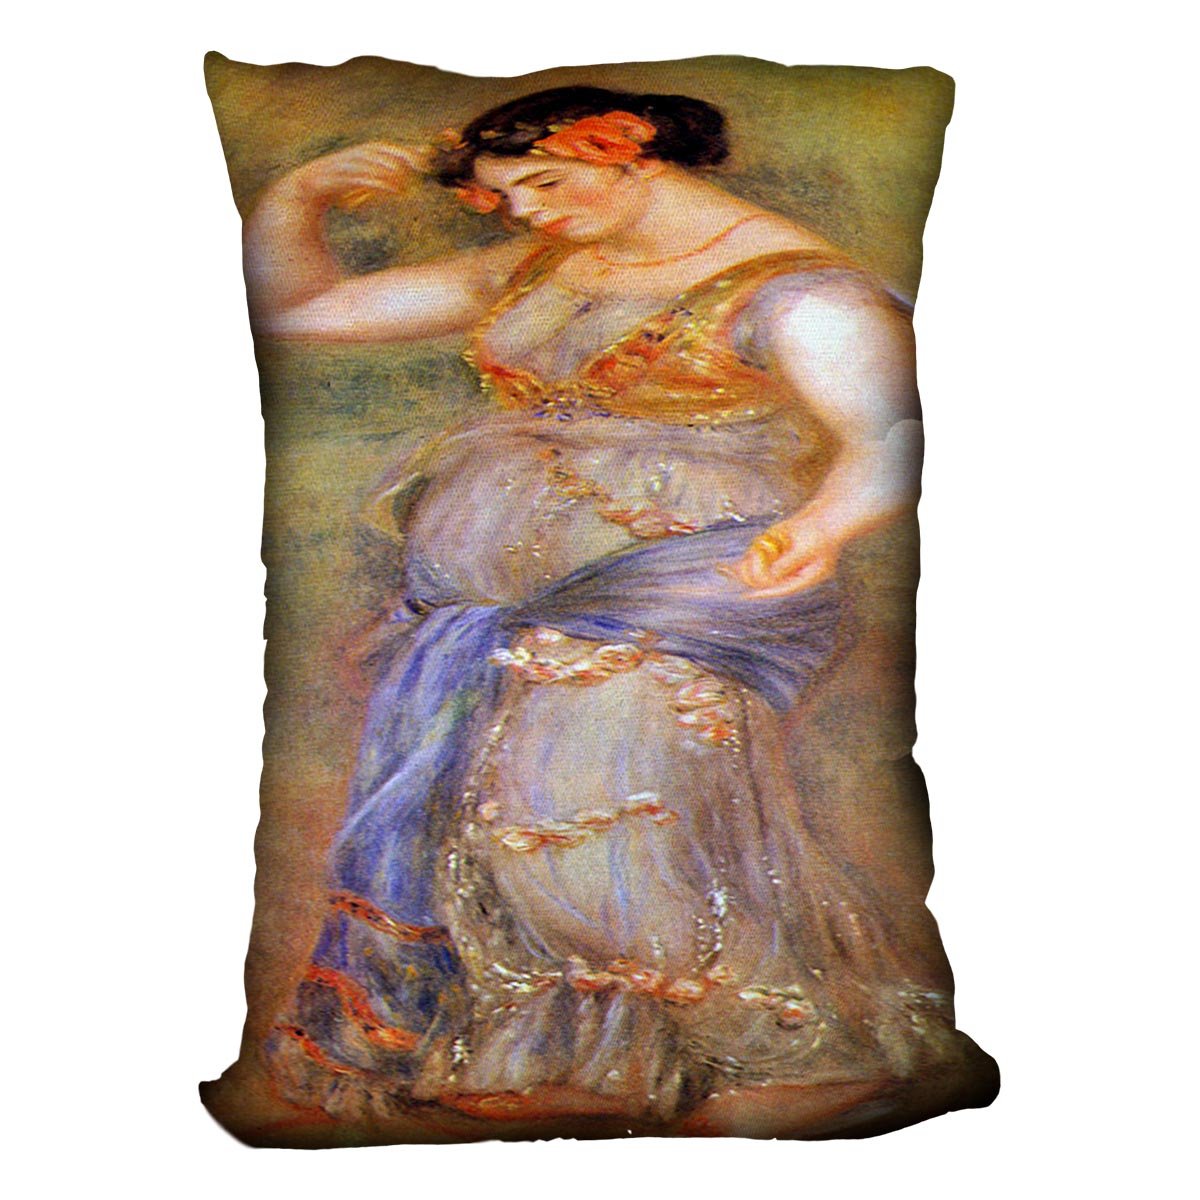 Dancer with castanets by Renoir Throw Pillow